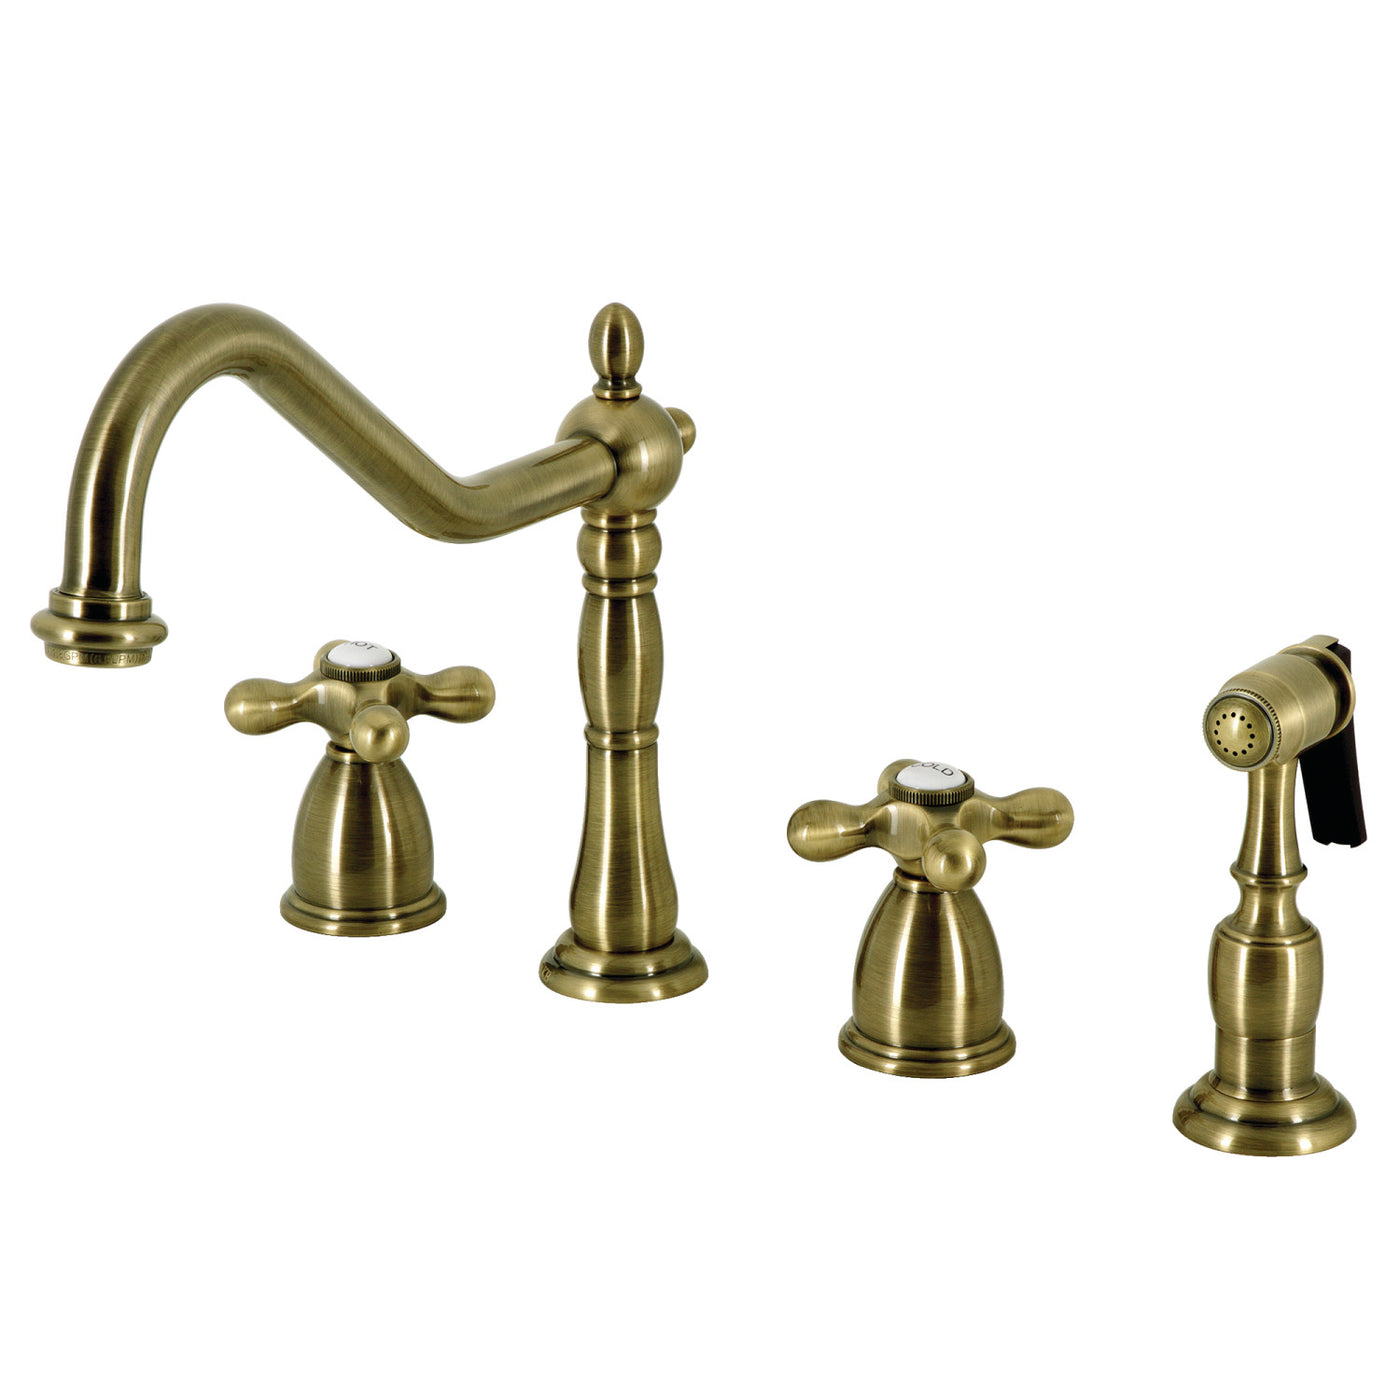 Elements of Design EB1793AXBS Widespread Kitchen Faucet with Brass Sprayer, Antique Brass